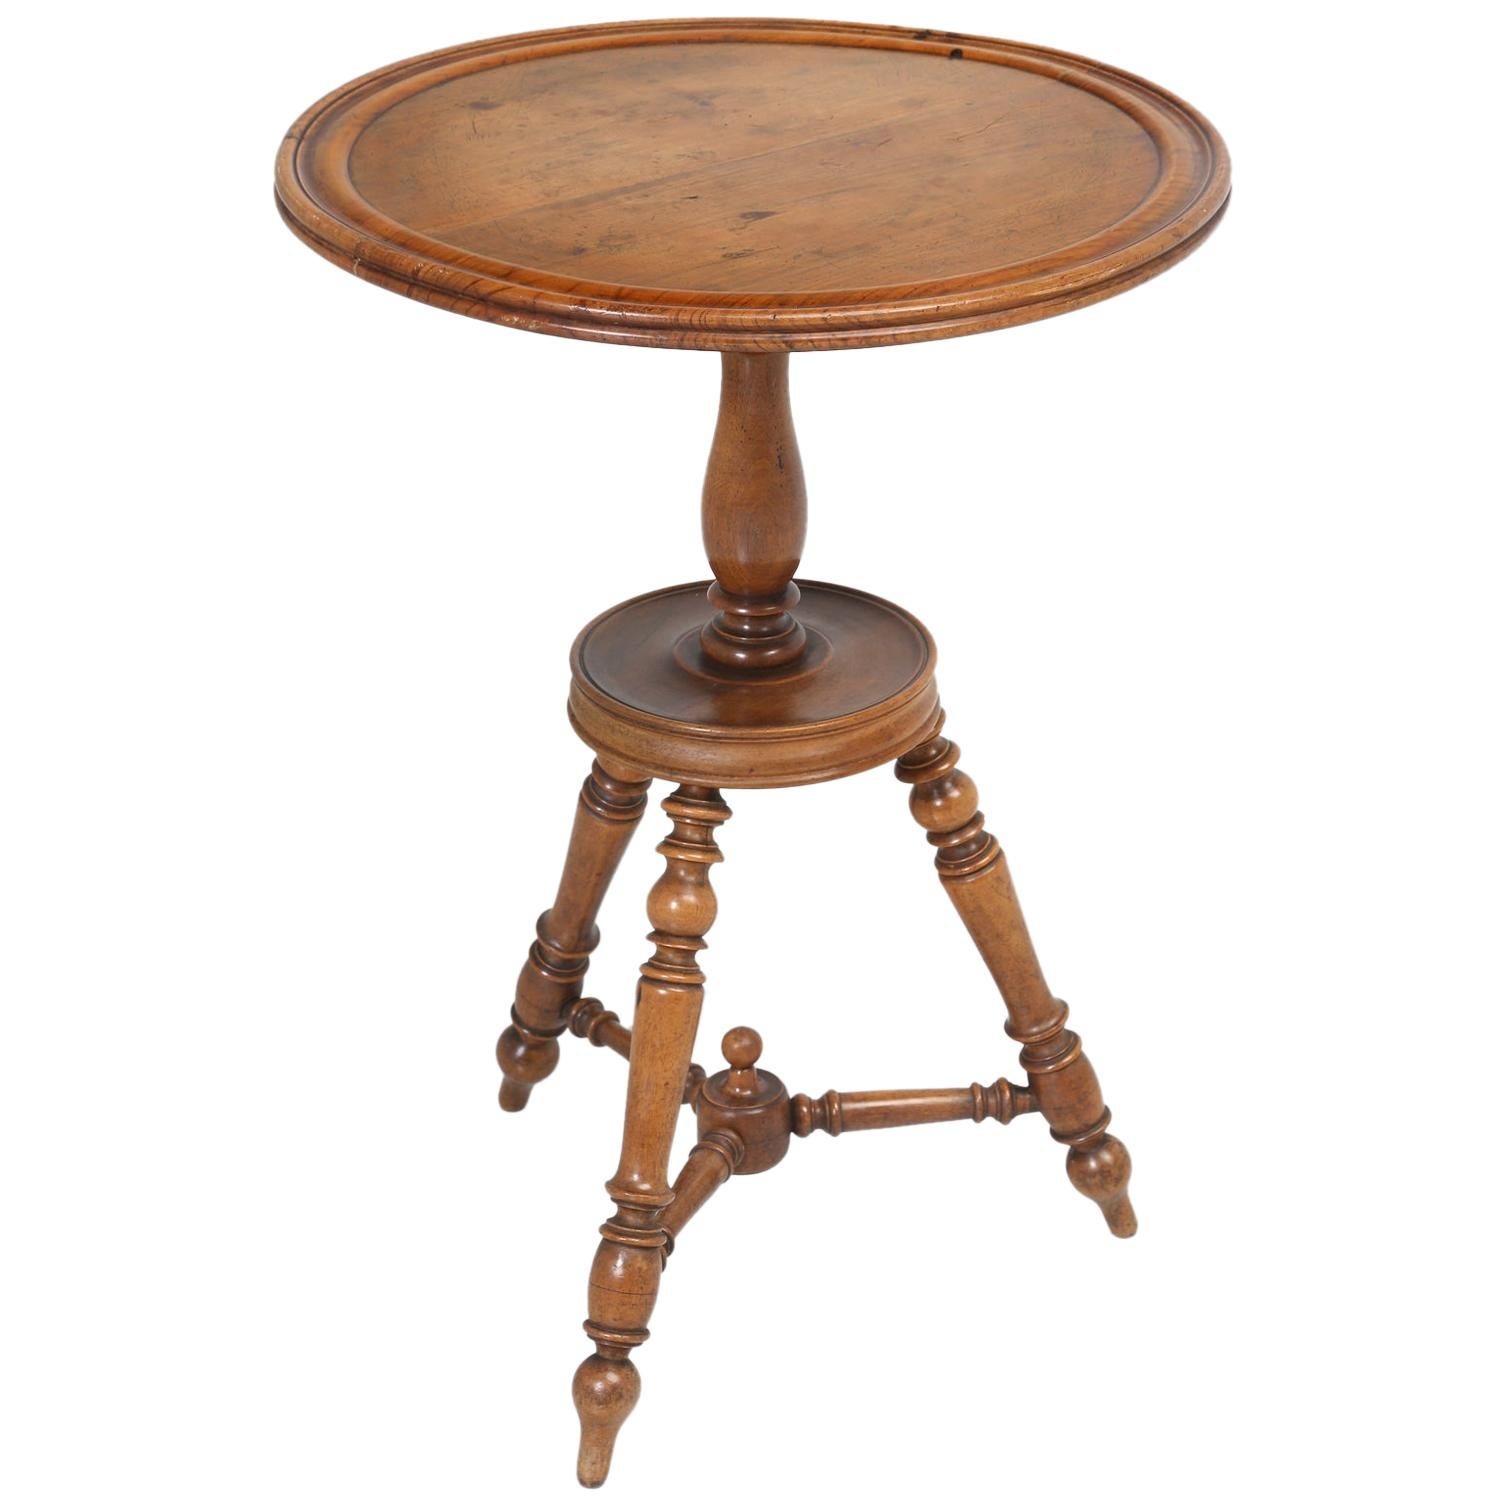 Antique French Walnut Round Petite Drink or Wine Side Table